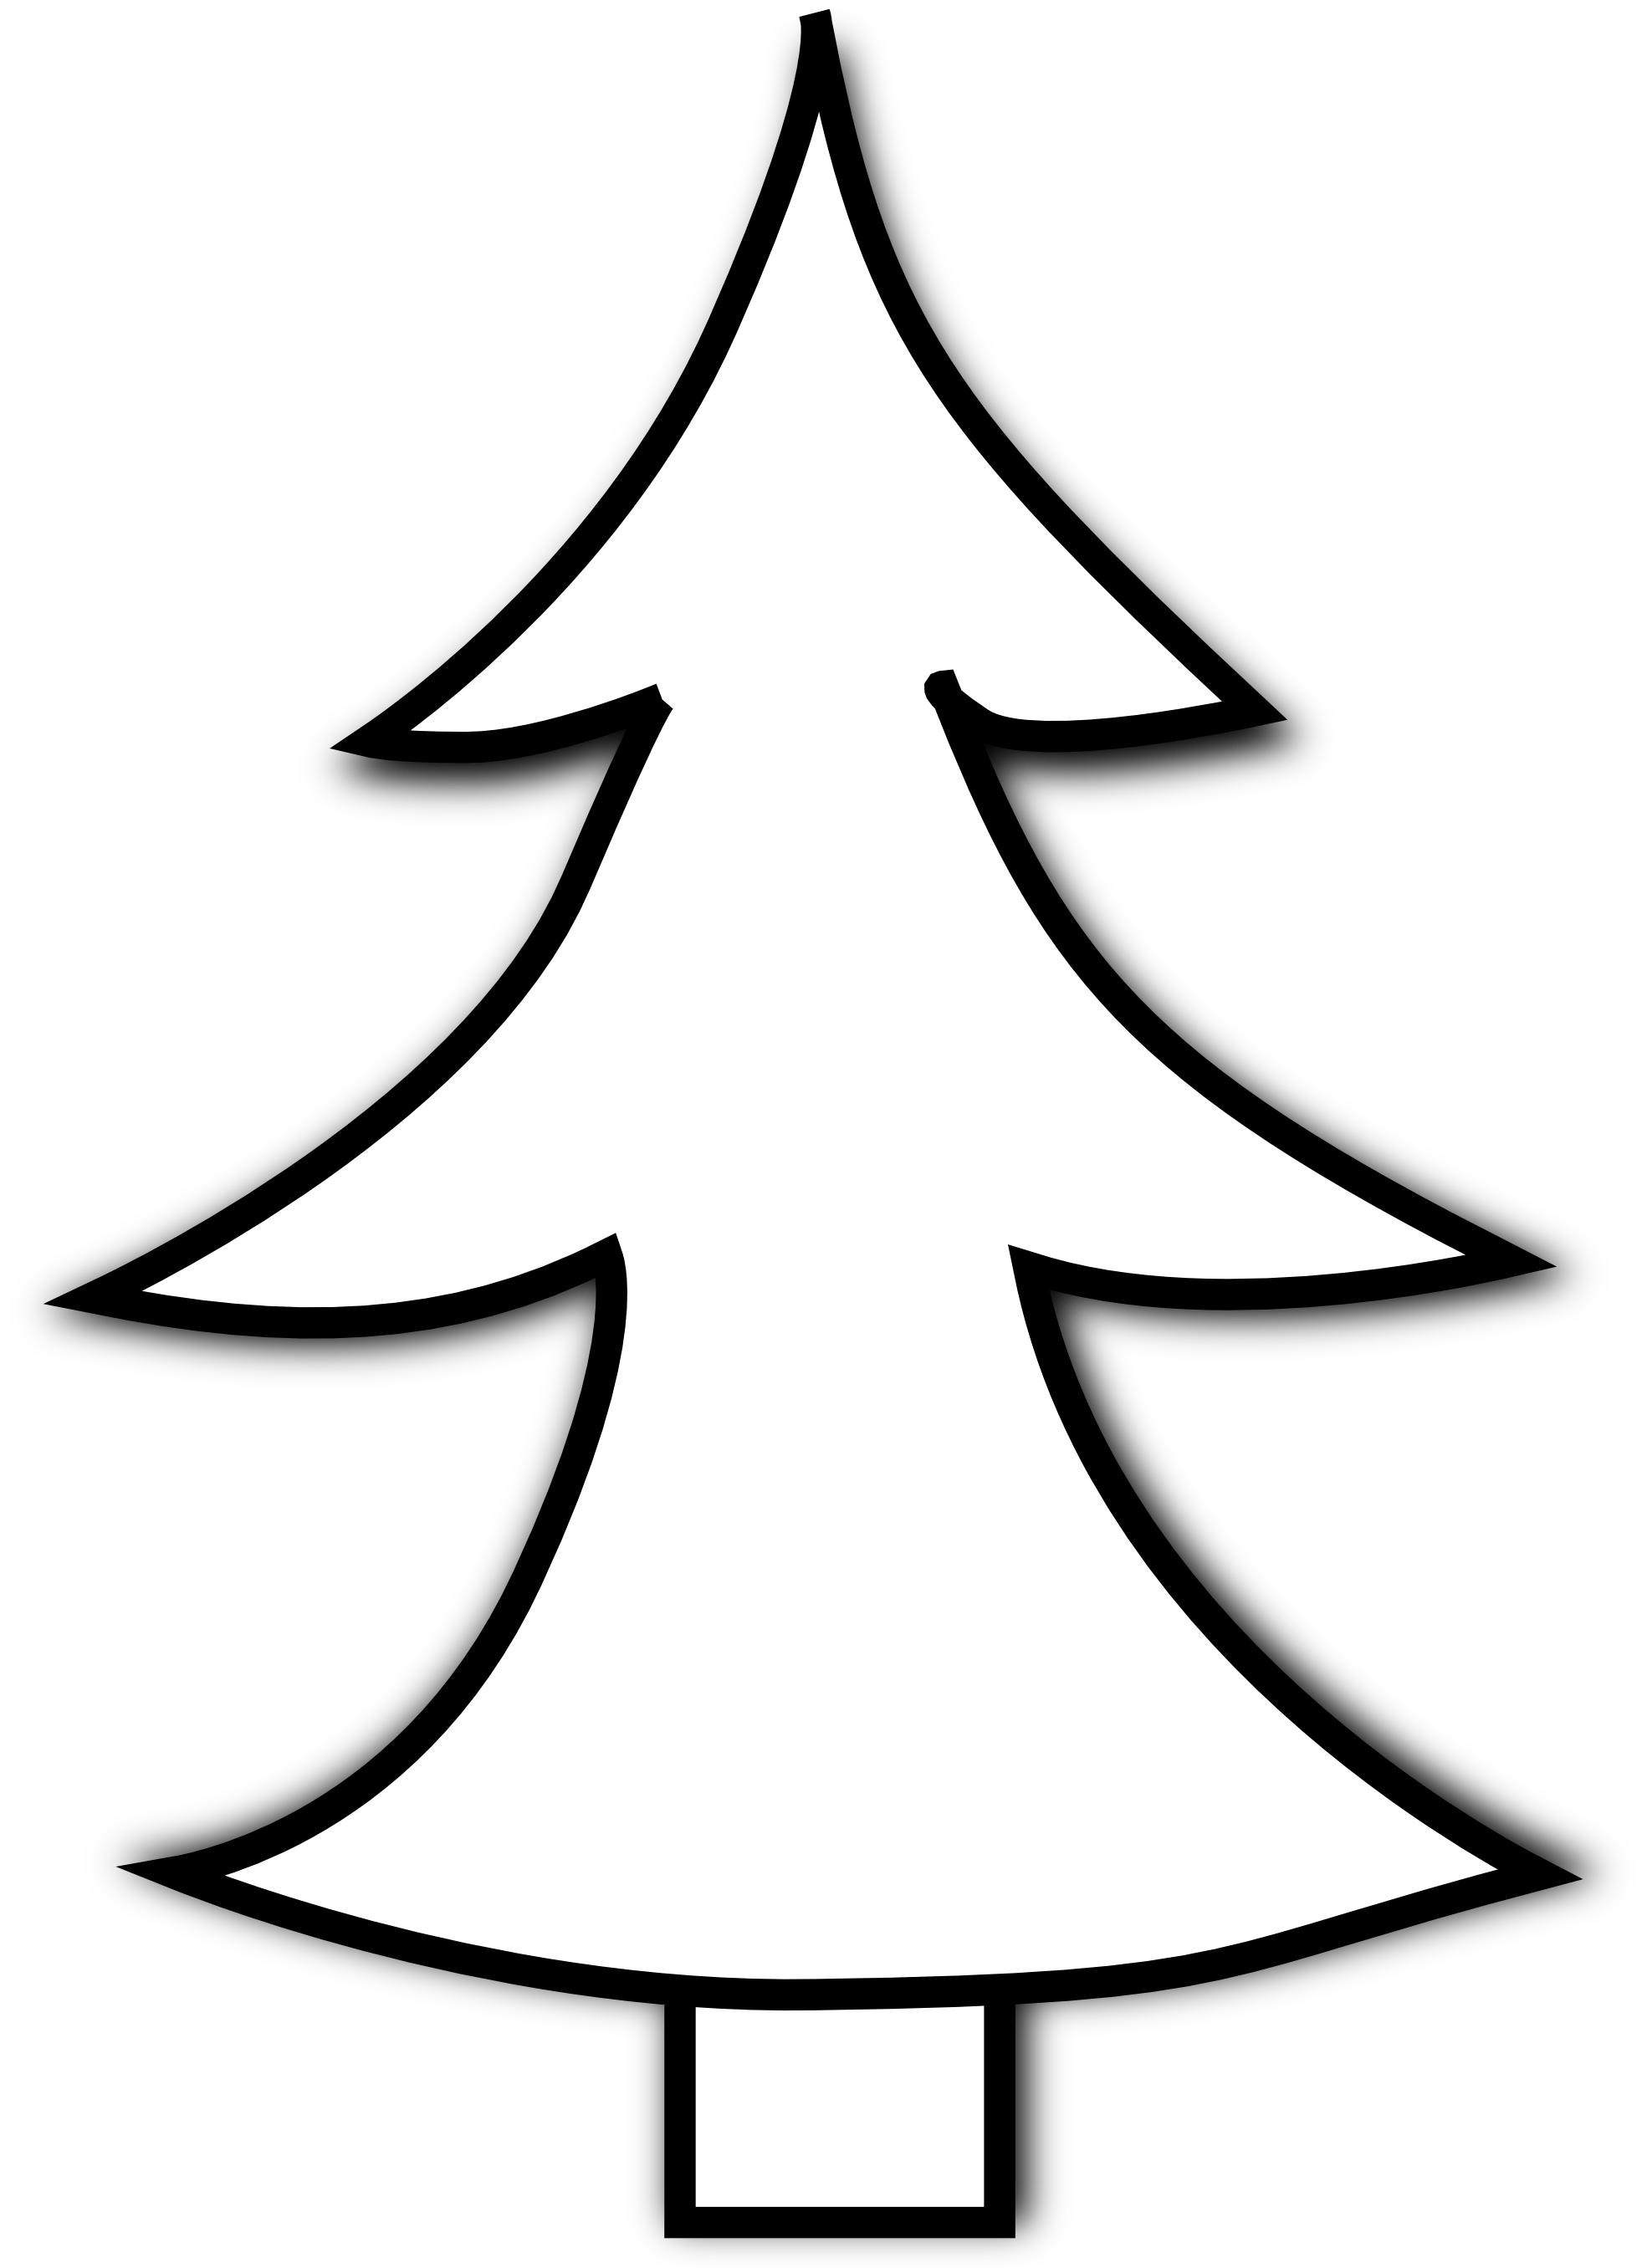 clipart trees black and white - photo #37